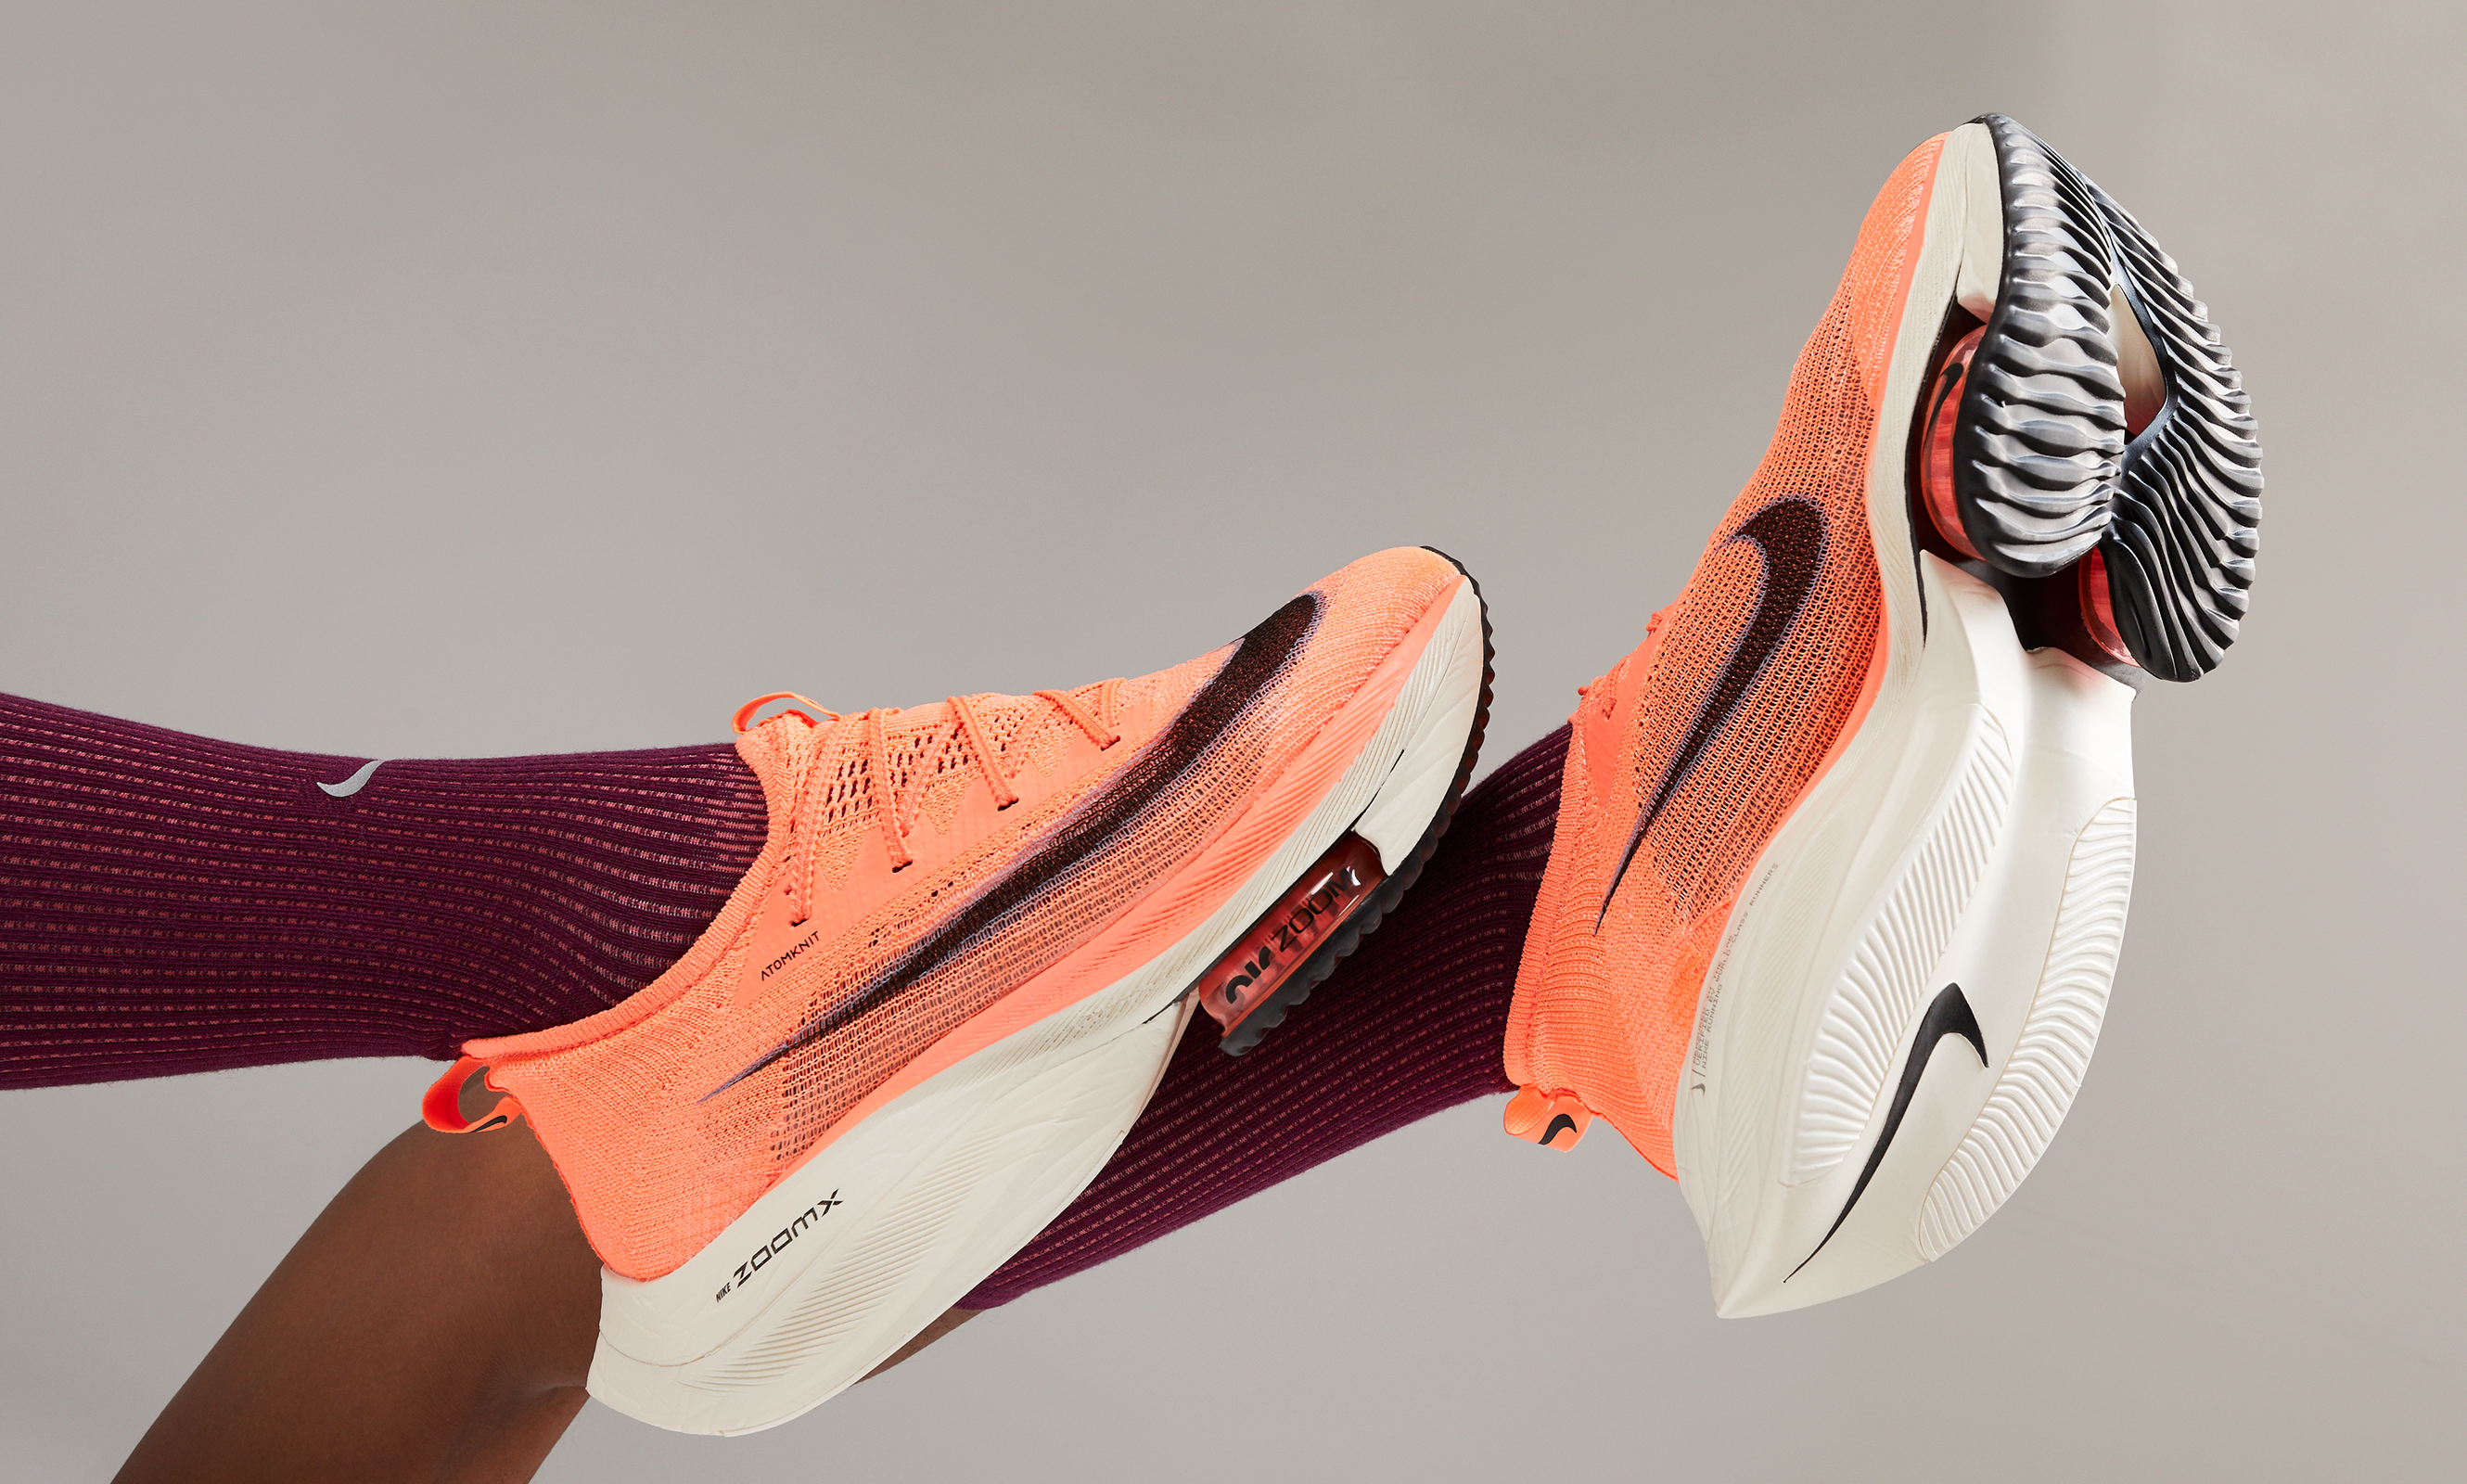 The Mango Pack from Nike is here.  The AlphaFly Next %, Vaporfly Next % and the Tempo Next % are all in this pack. This marks the first time all 3 models exist in the same pack!